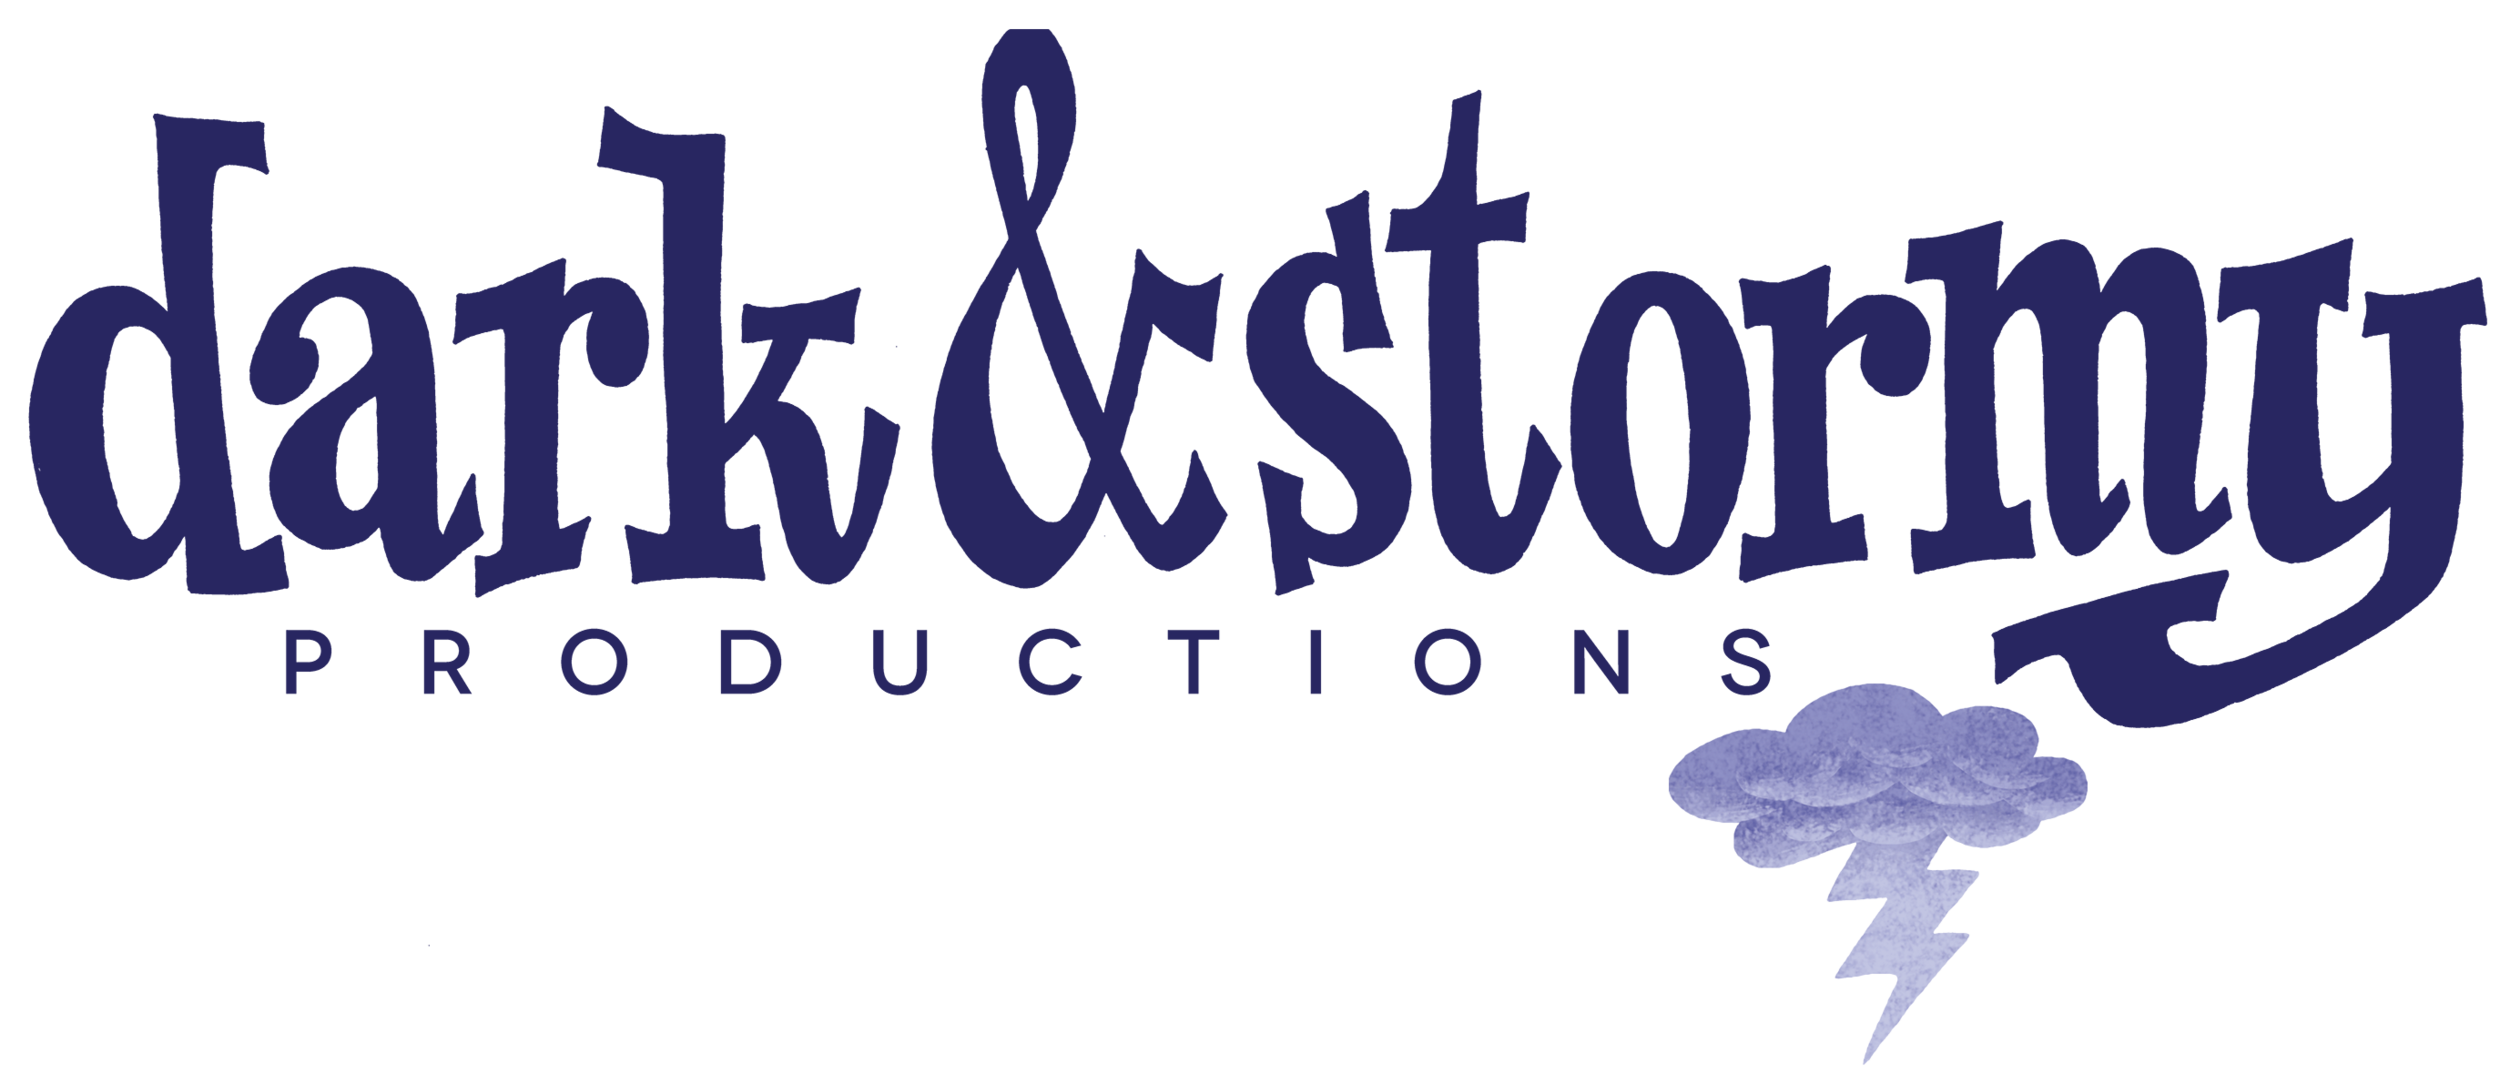 Dark &amp; Stormy Productions